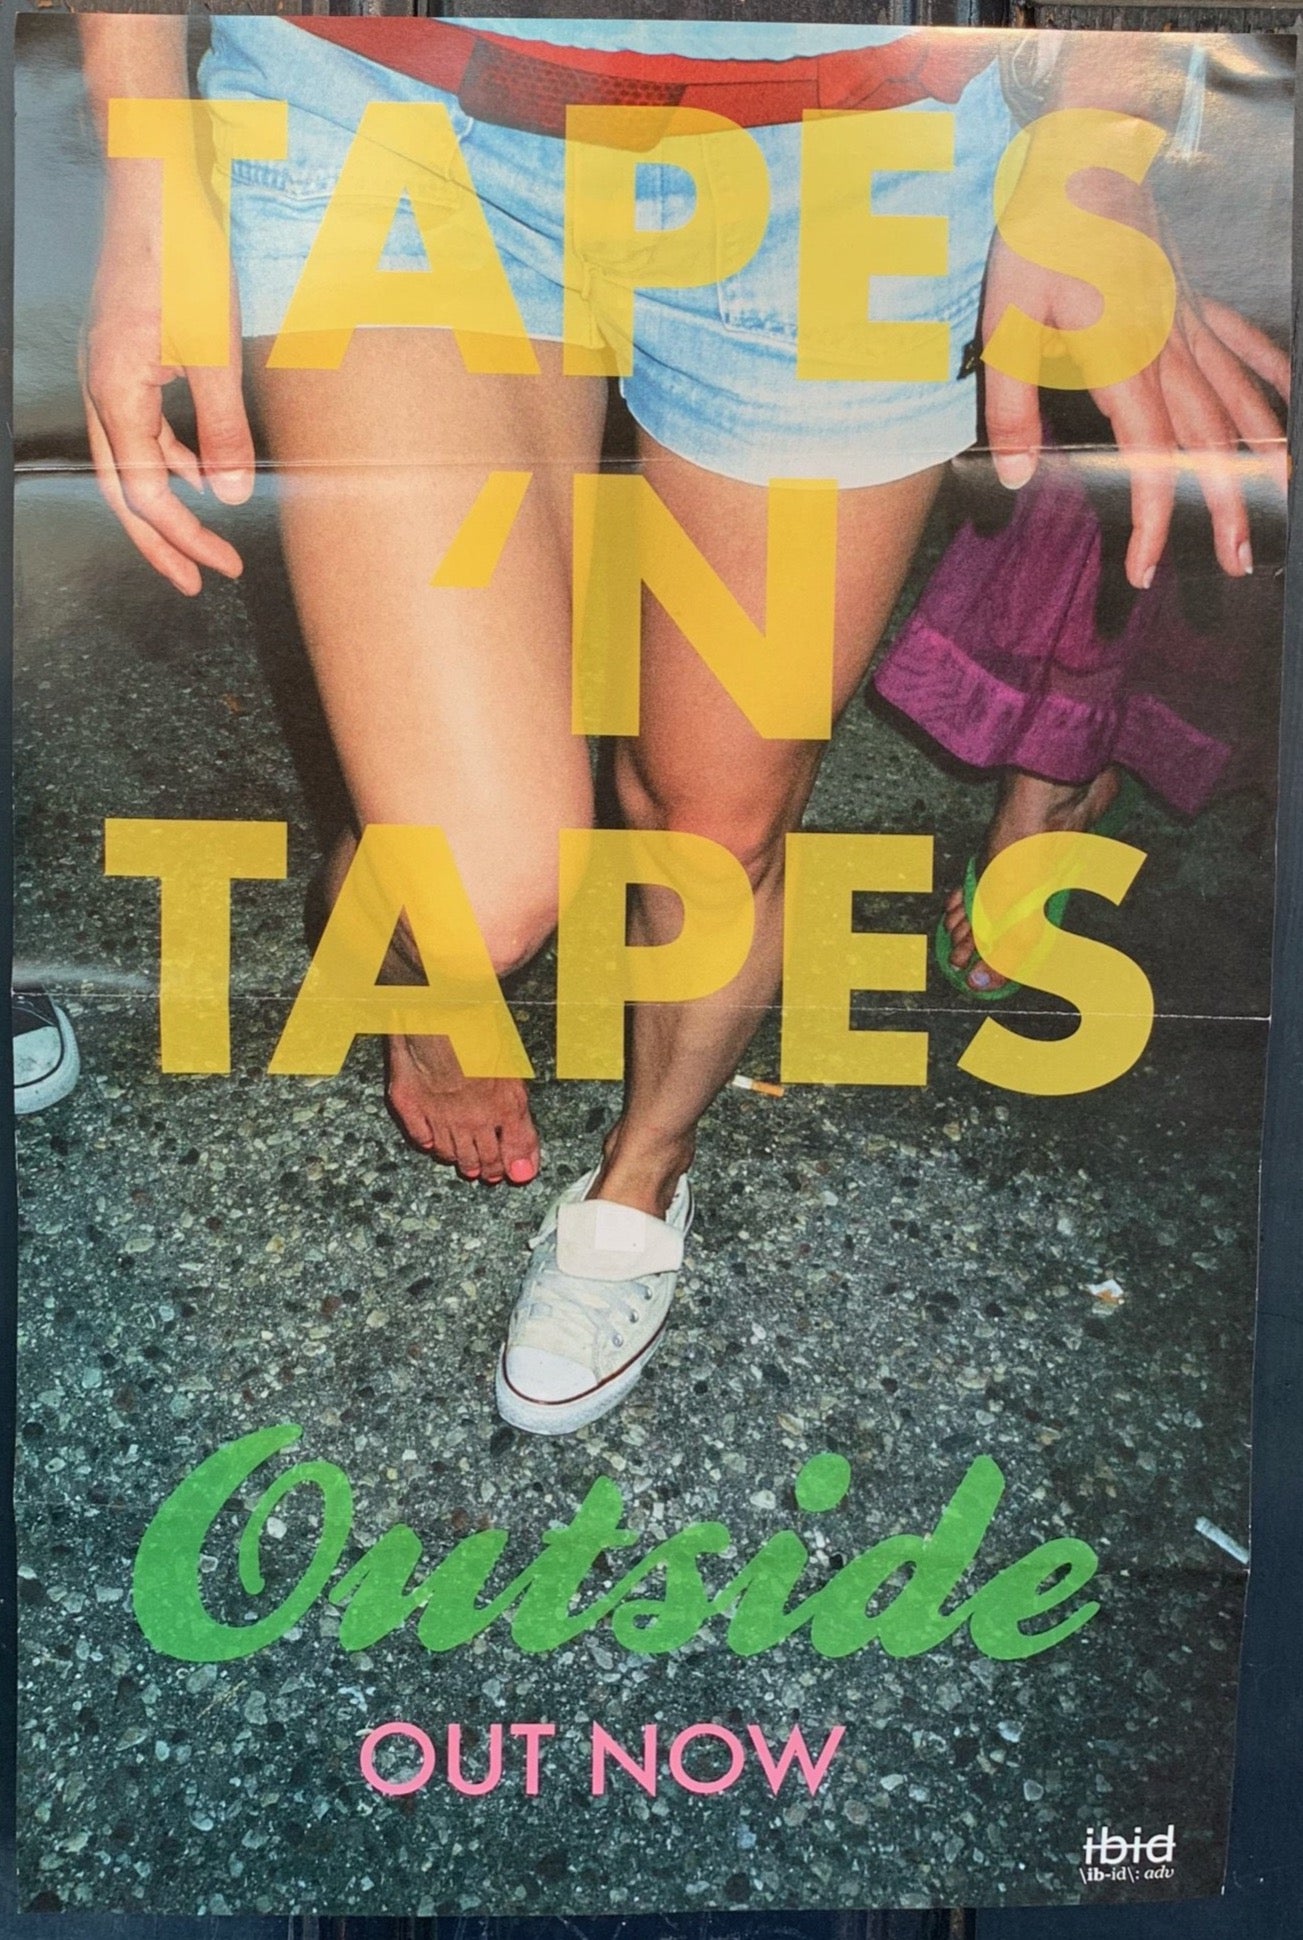 TAPES 'N TAPES by Outside Album Poster